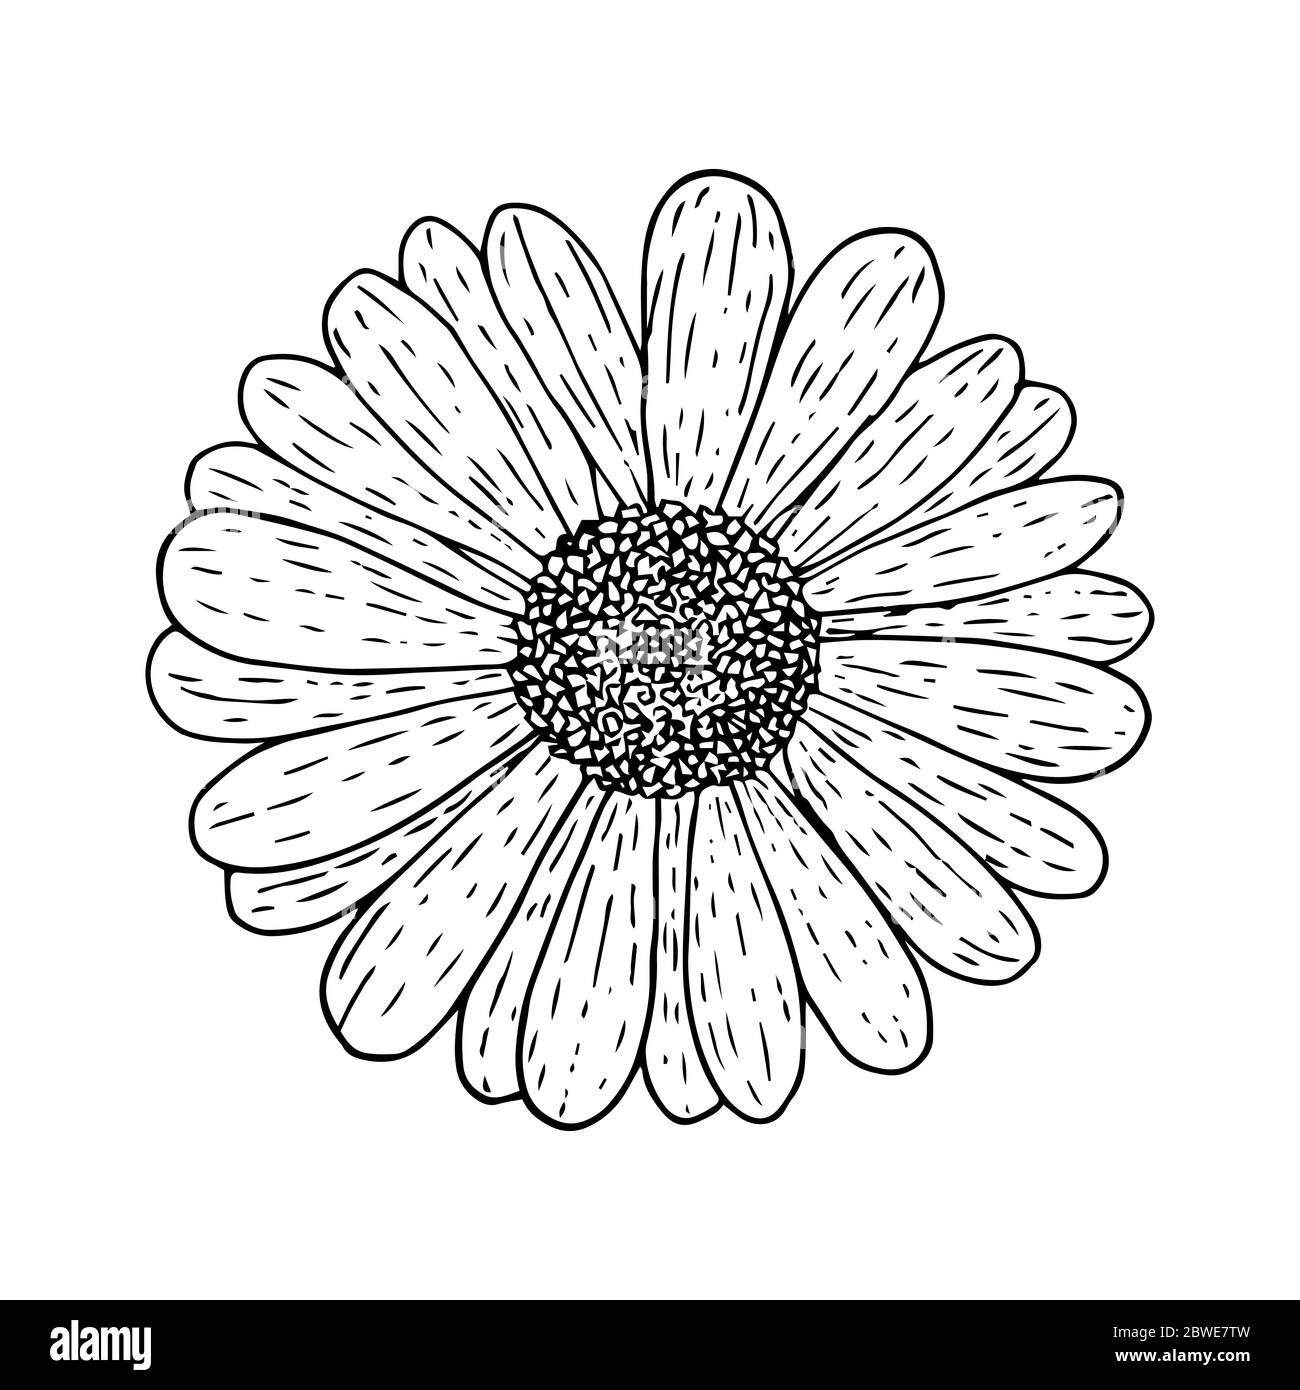 Chrysanthemum flower top view, black outline isolated on white background, stock vector illustration for design and decoration, tattoo, print, logo, c Stock Vector